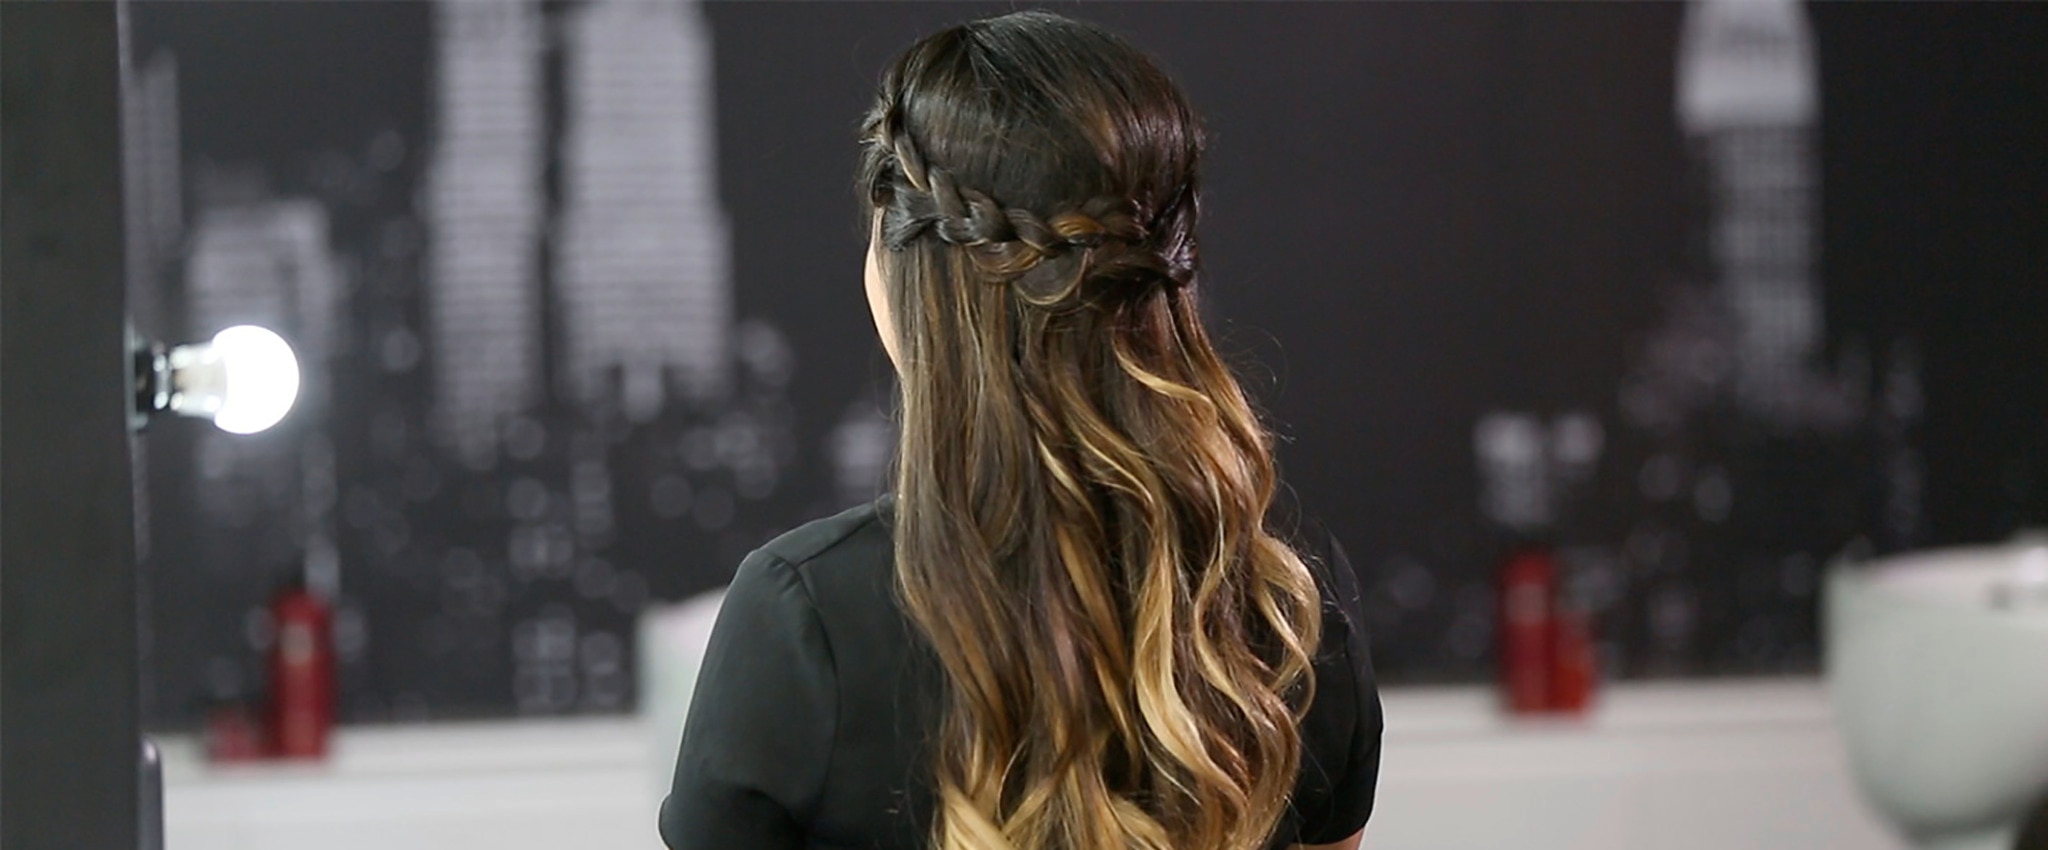 A model with long brown hair styled into a braided crown.